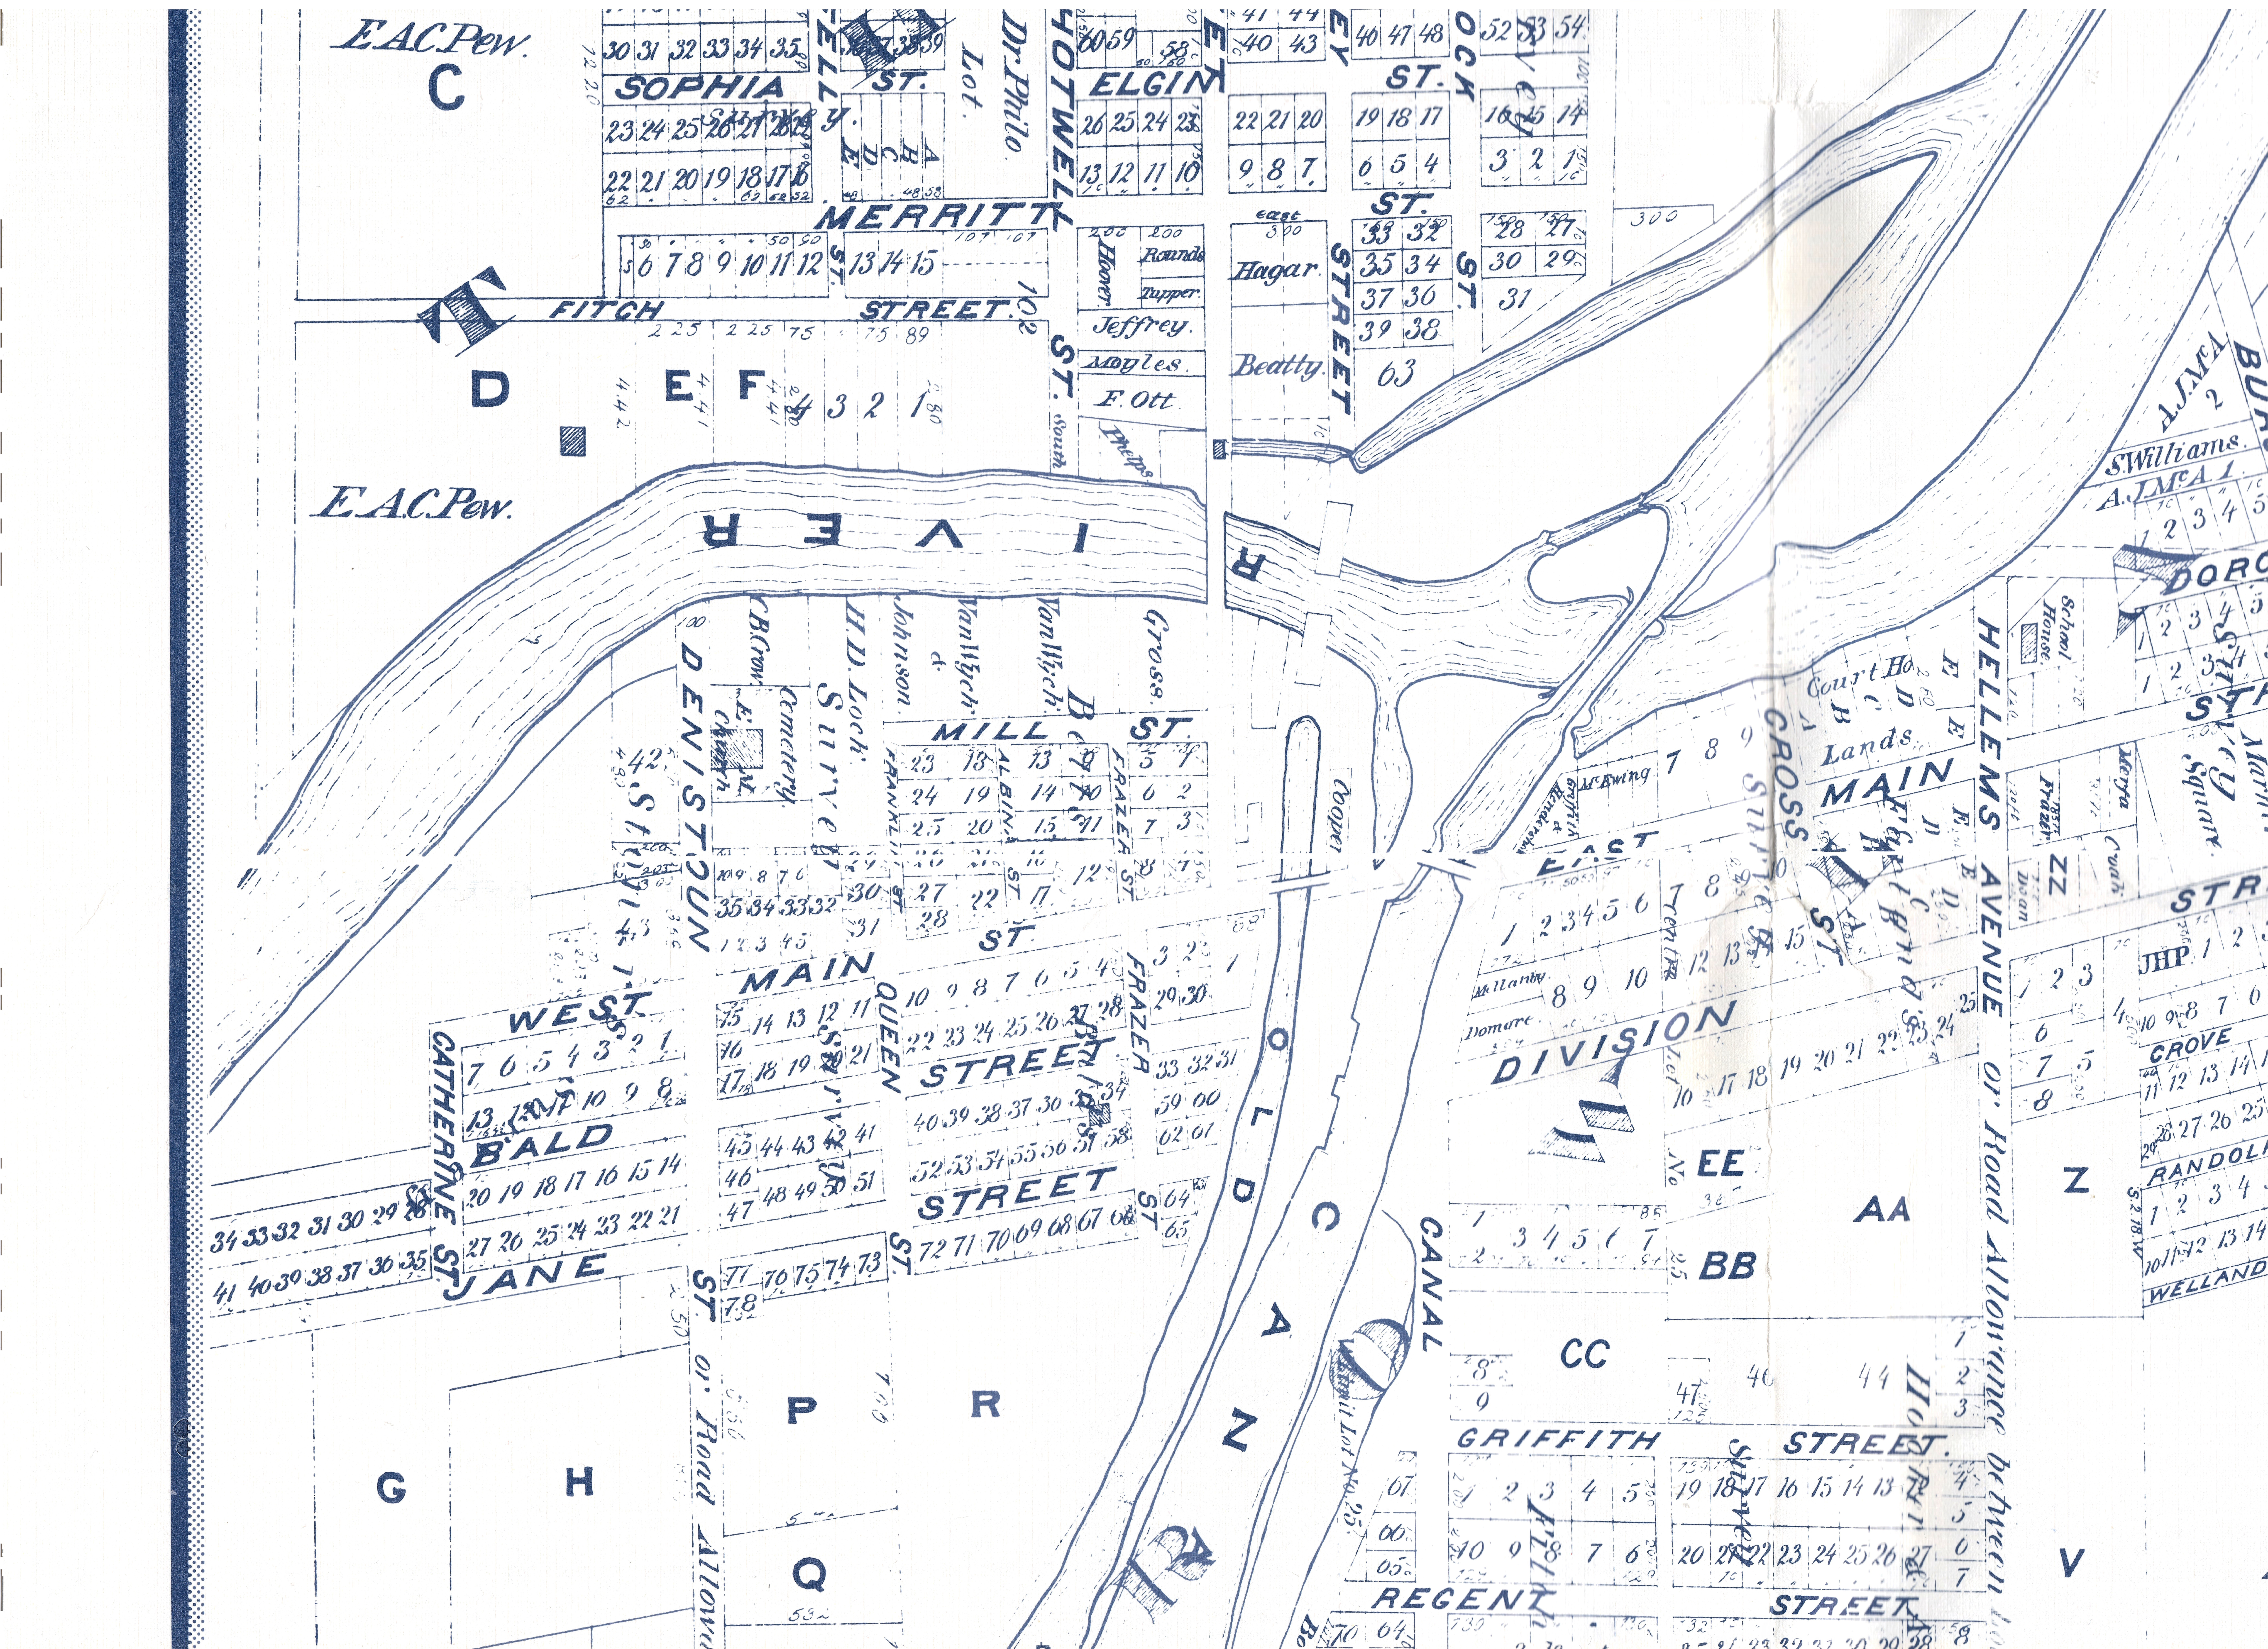 The bottom left corner of a map of Welland form 1876.